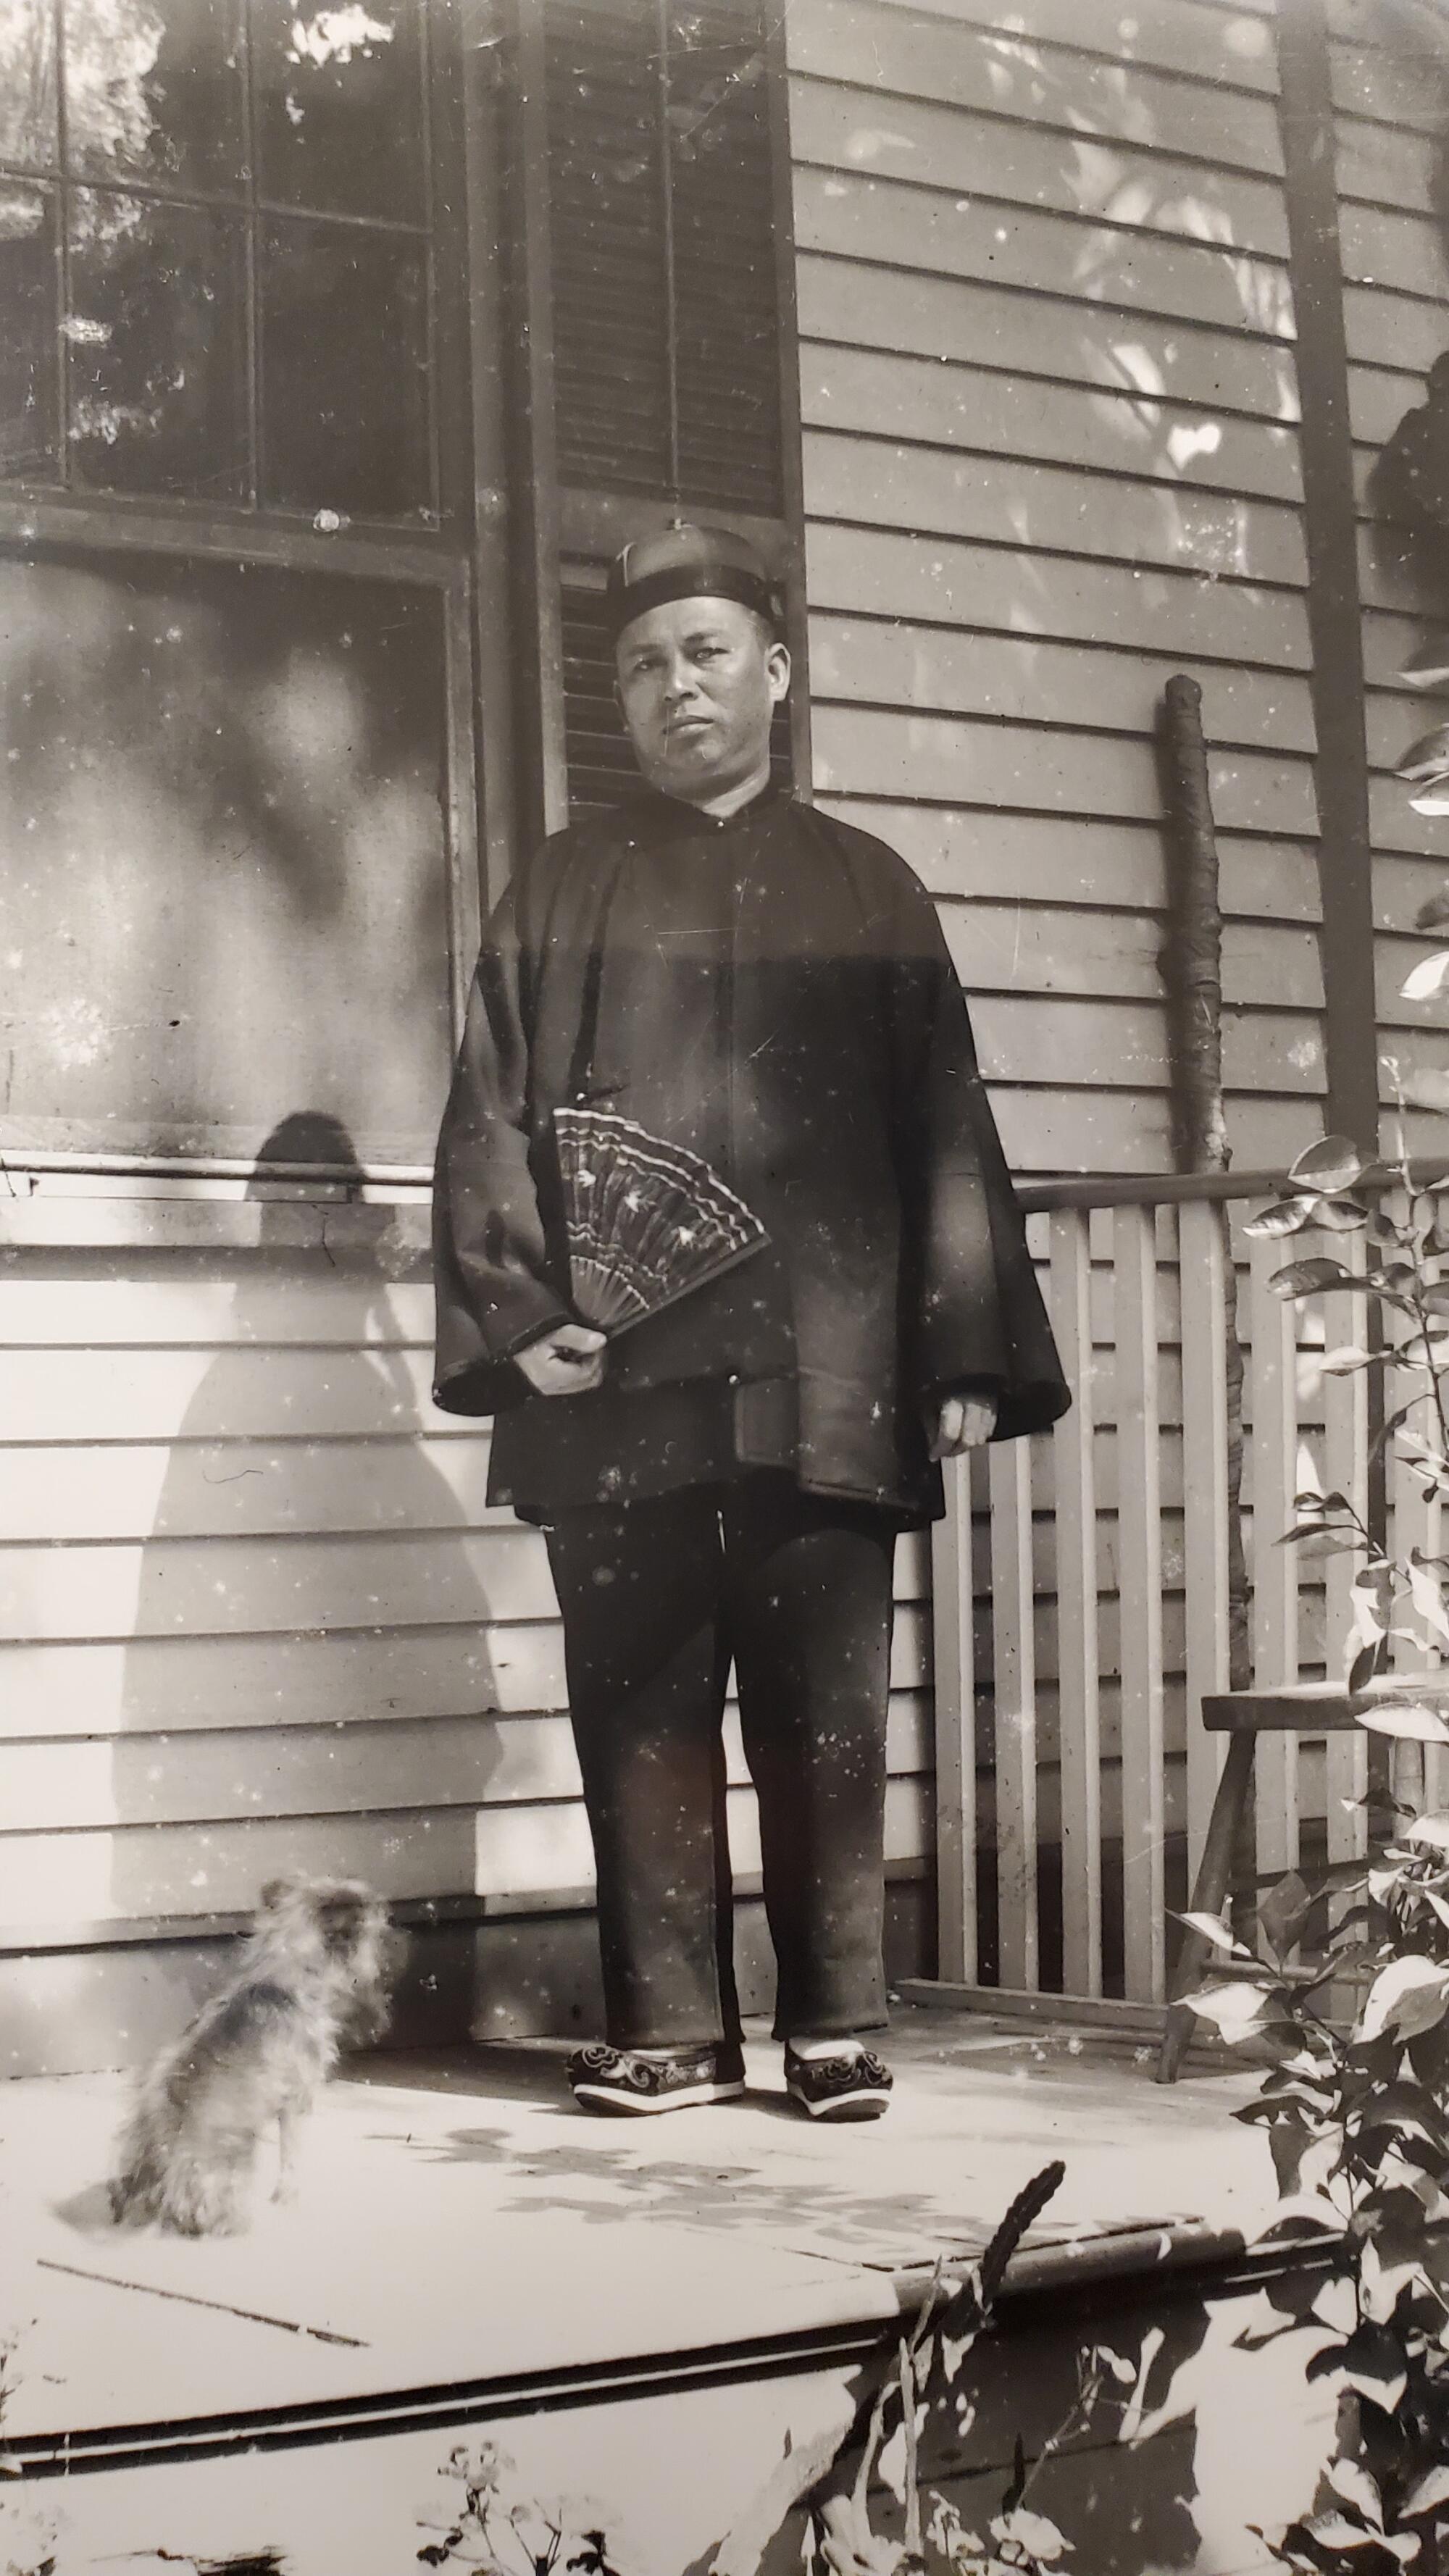 An old black-and-white photo of a man standing on a porch, a small dog at his feet.